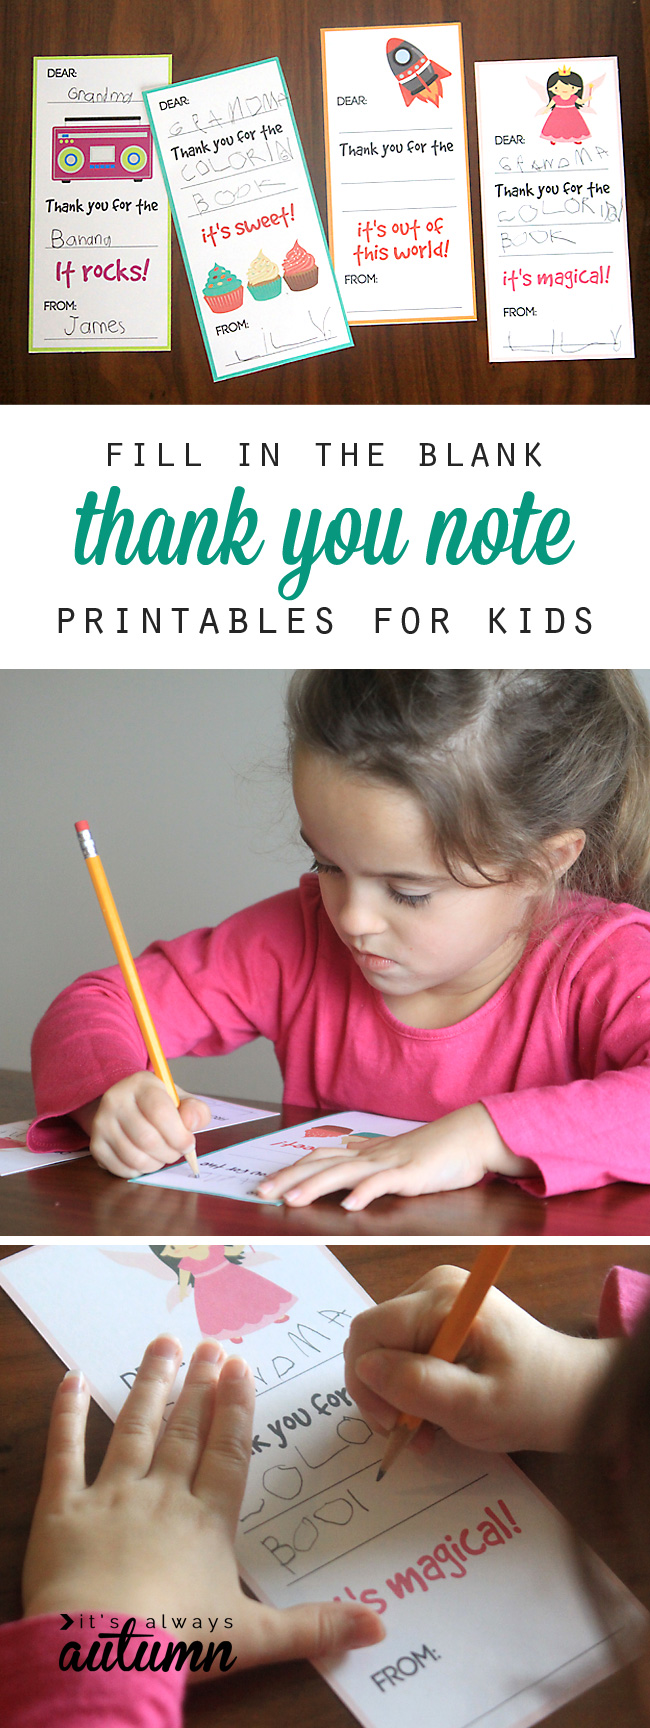 fill-in-the-blank-thank-you-note-printables-for-kids-it-s-always-autumn